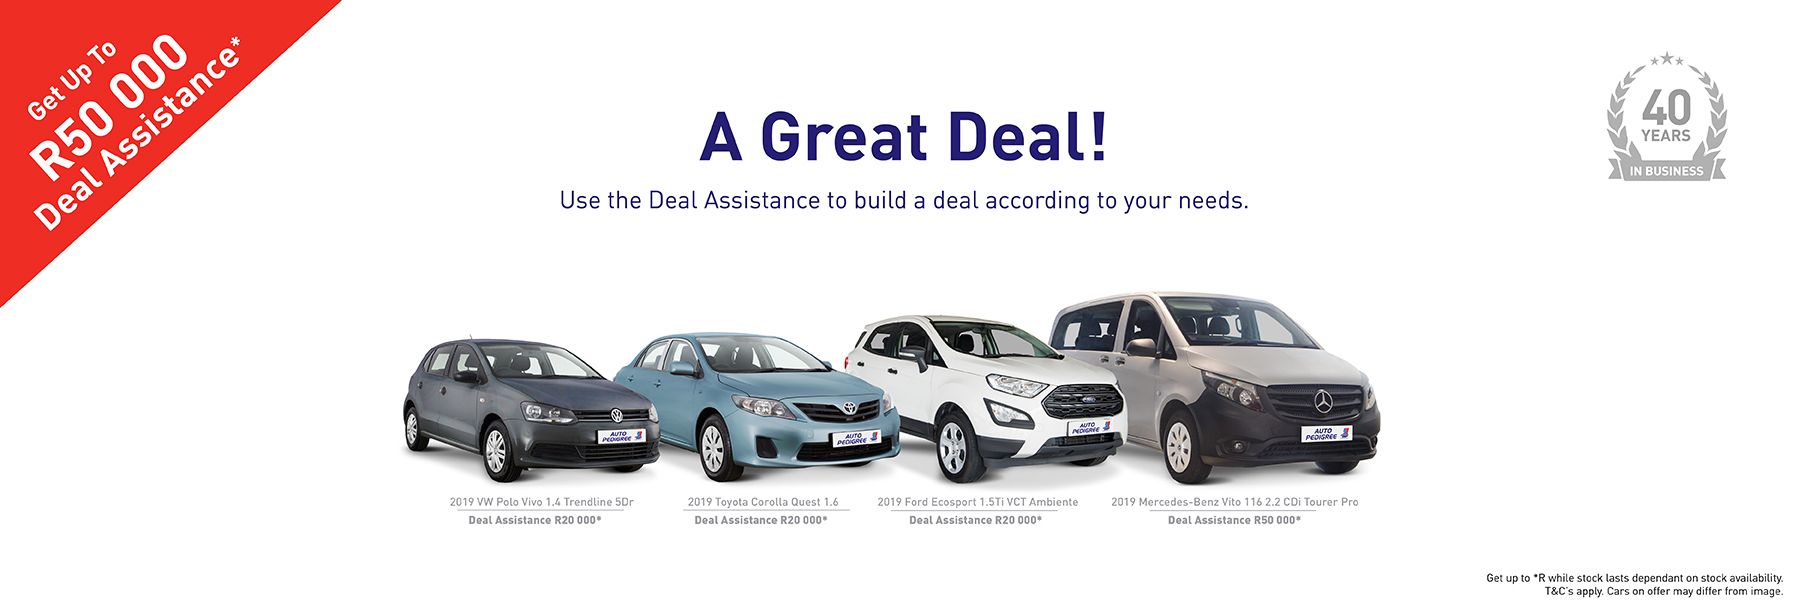 Use the Deal Assistance to Structure an Affordable Deal